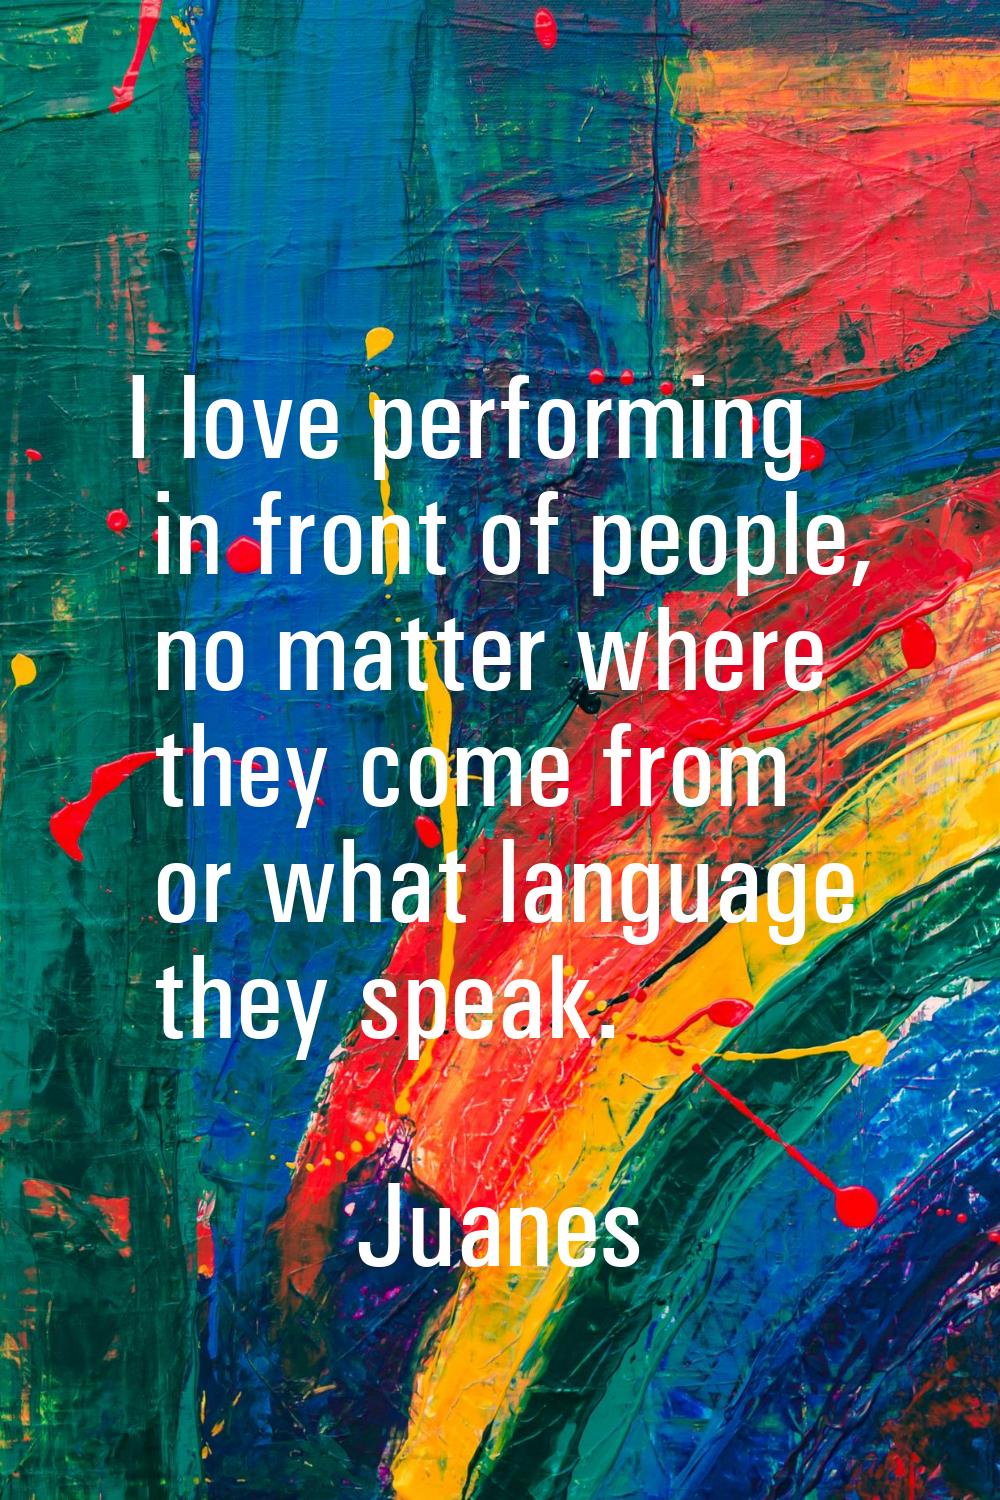 I love performing in front of people, no matter where they come from or what language they speak.